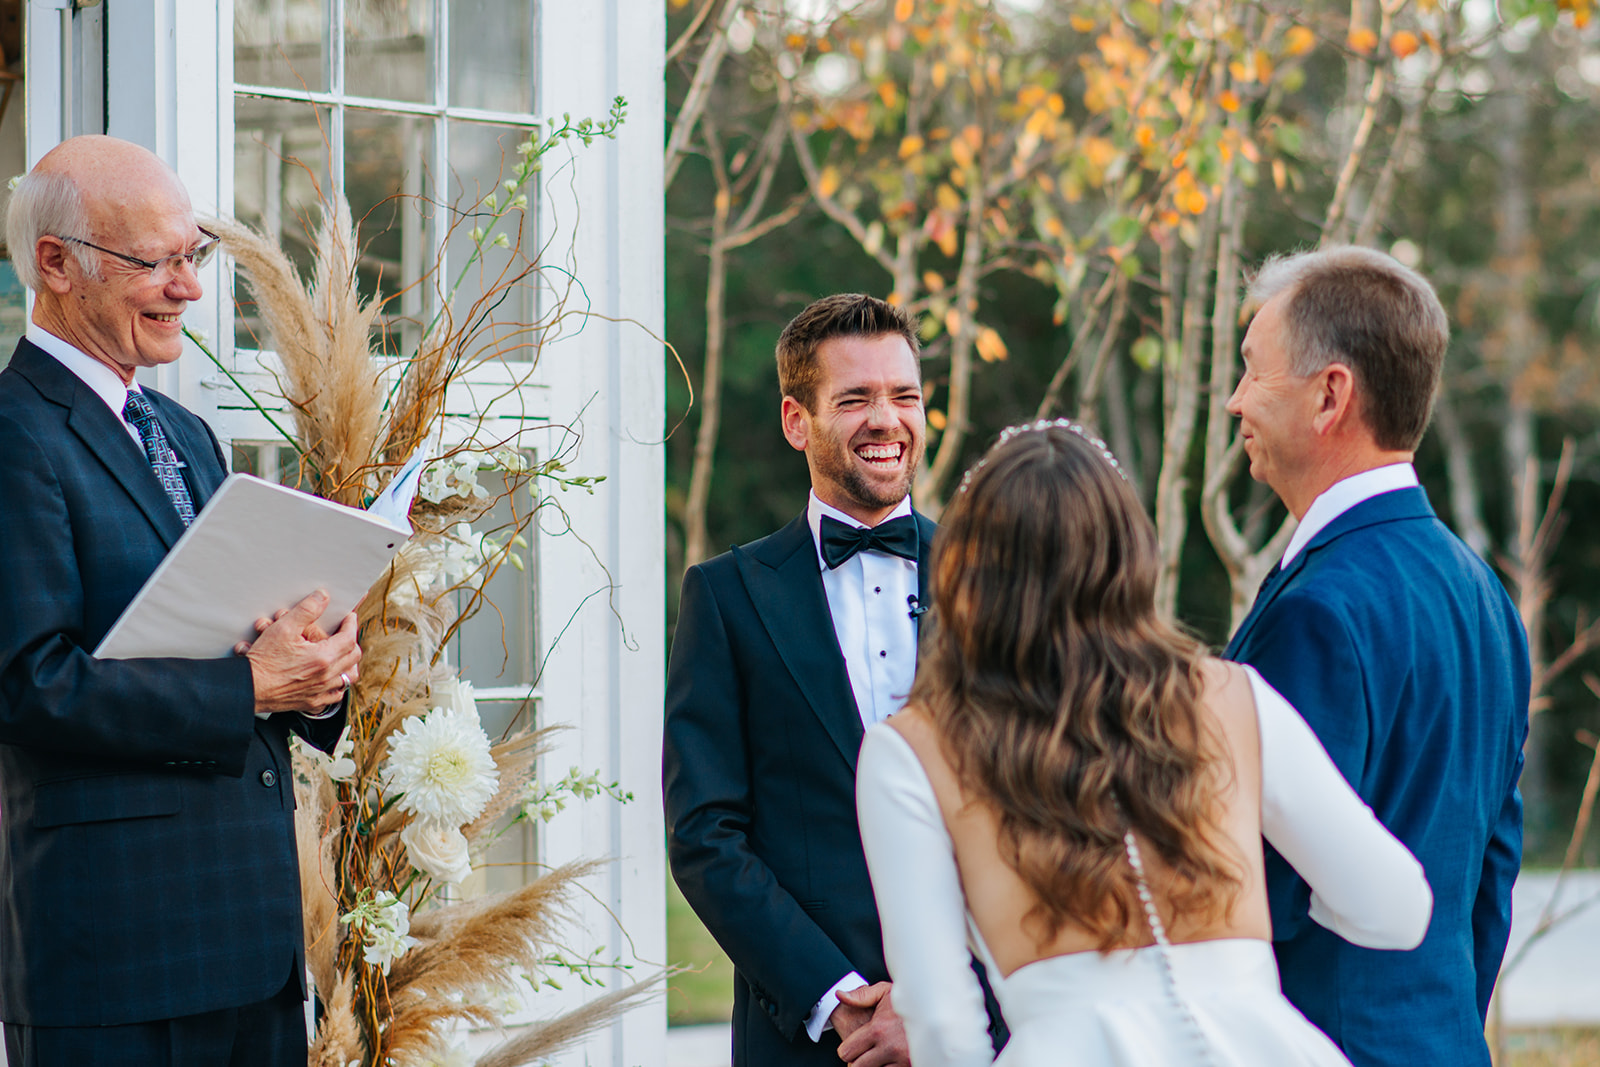 The groom laughs with his bride and her father at the altar before they say "I Do" at their winter wedding at 7F Lodge in College Station, TX.